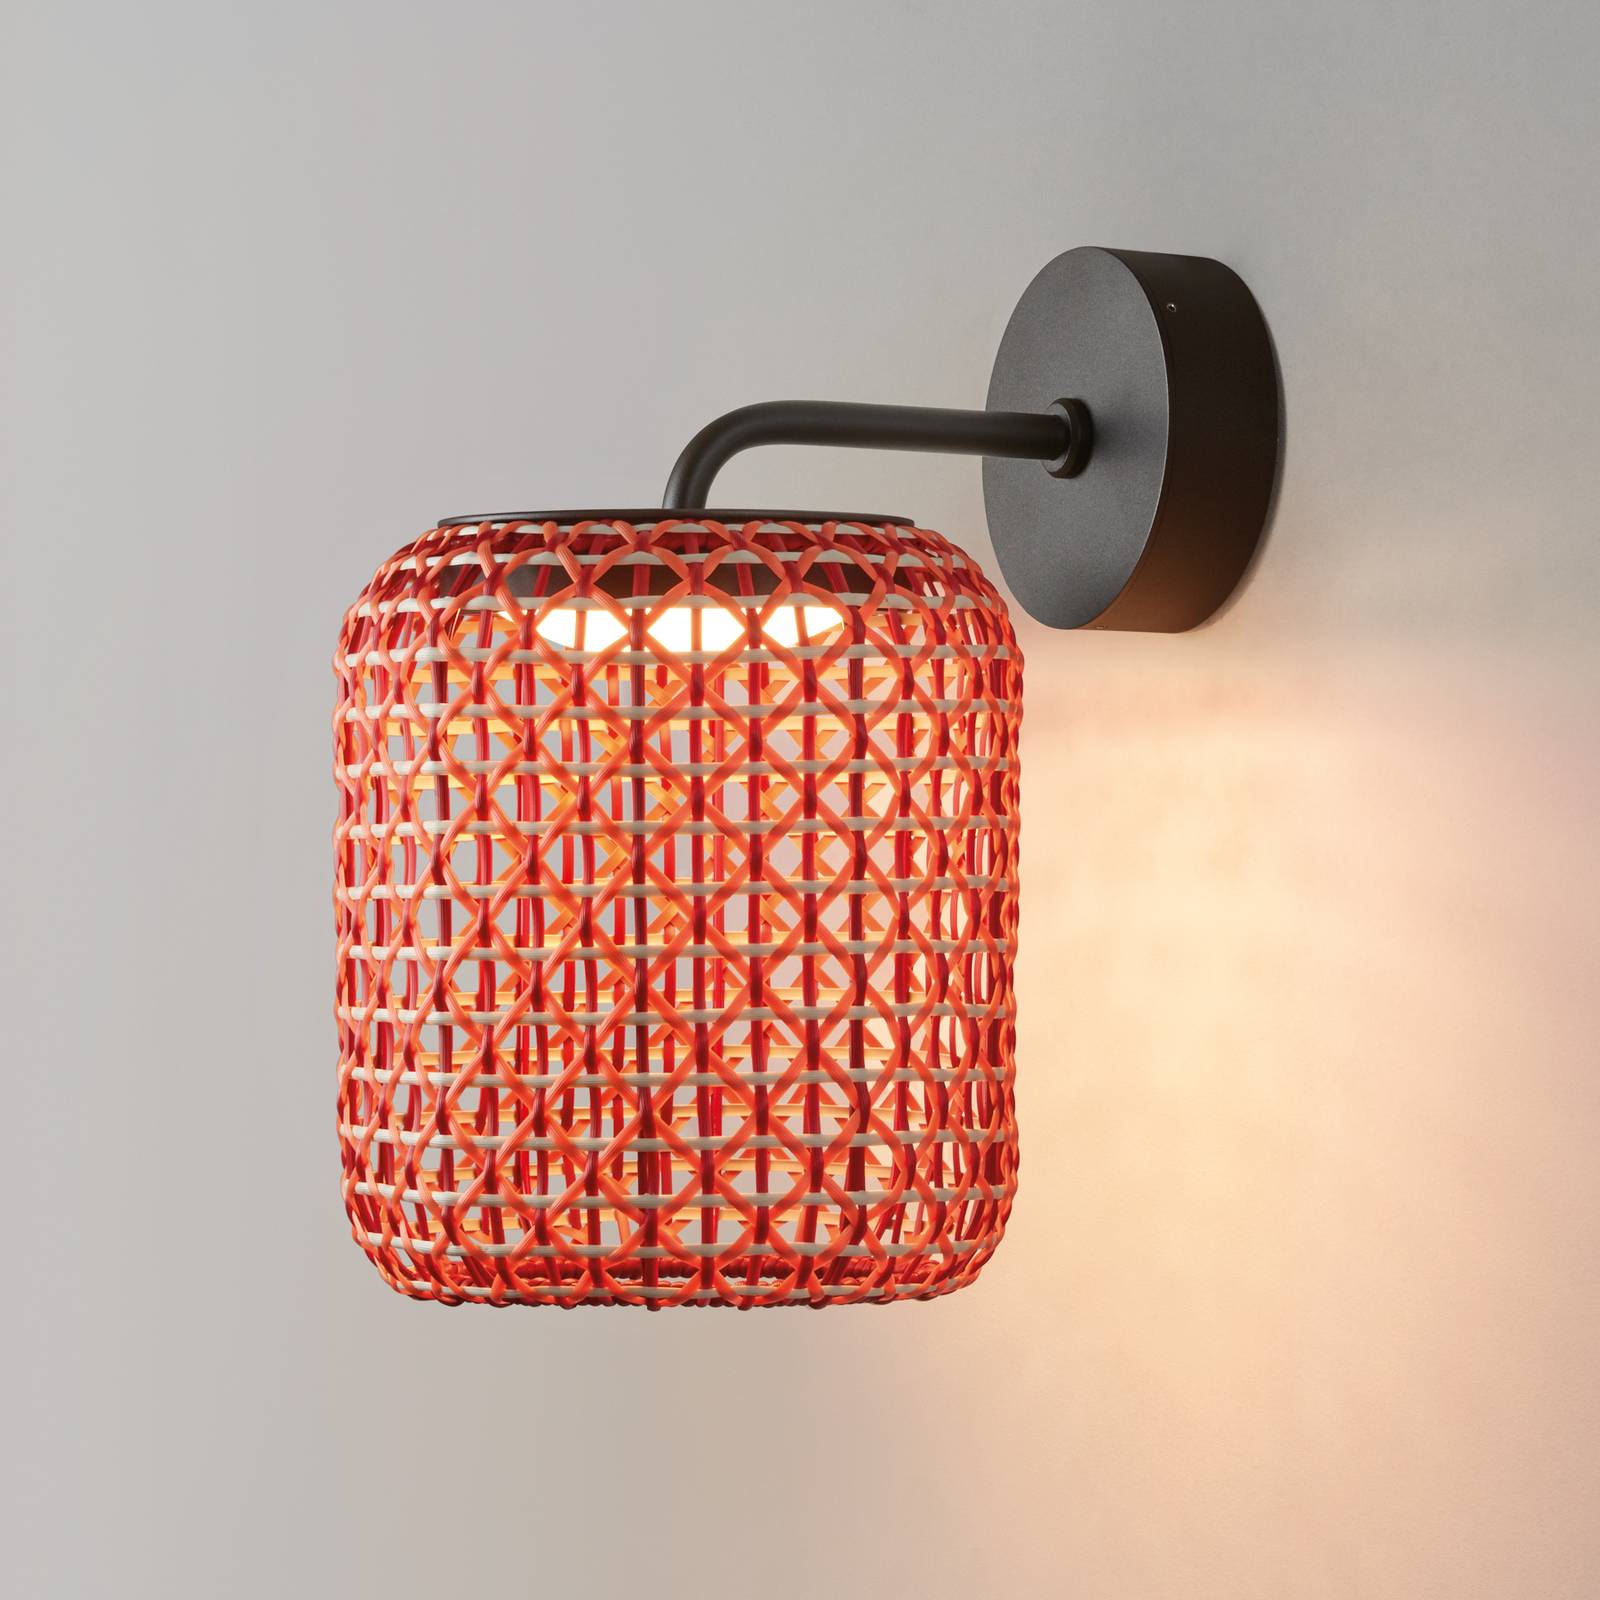 Photos - Chandelier / Lamp BOVER Nans A LED outdoor wall light, red, Ø 21.6 cm 